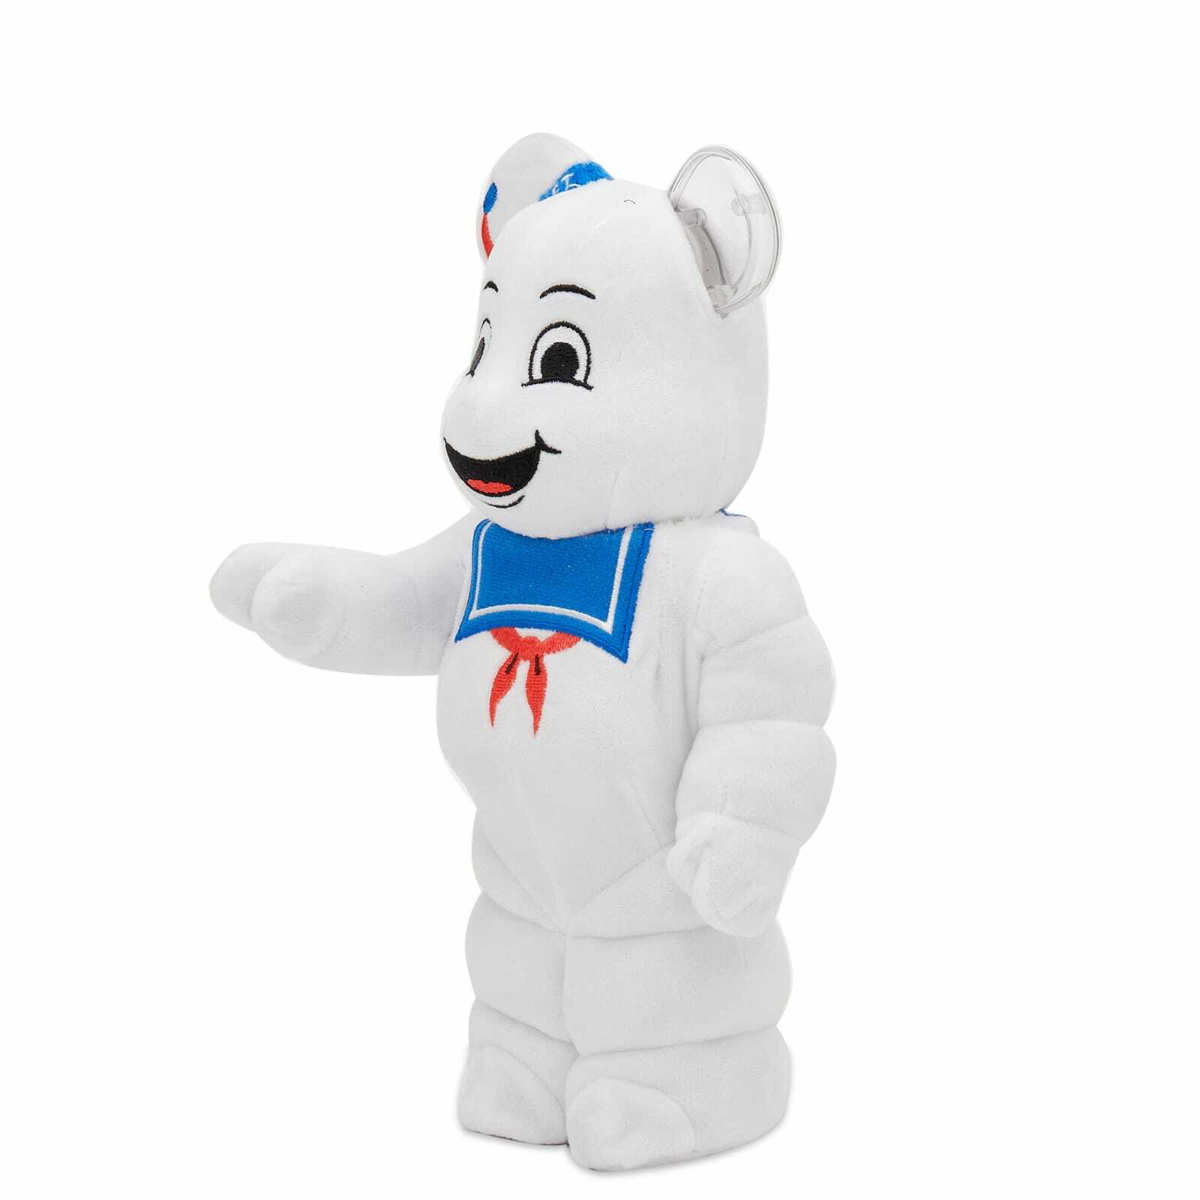 Medicom STAY PUFT MARSHMALLOW MAN COSTUME Be@rbrick in White 400%